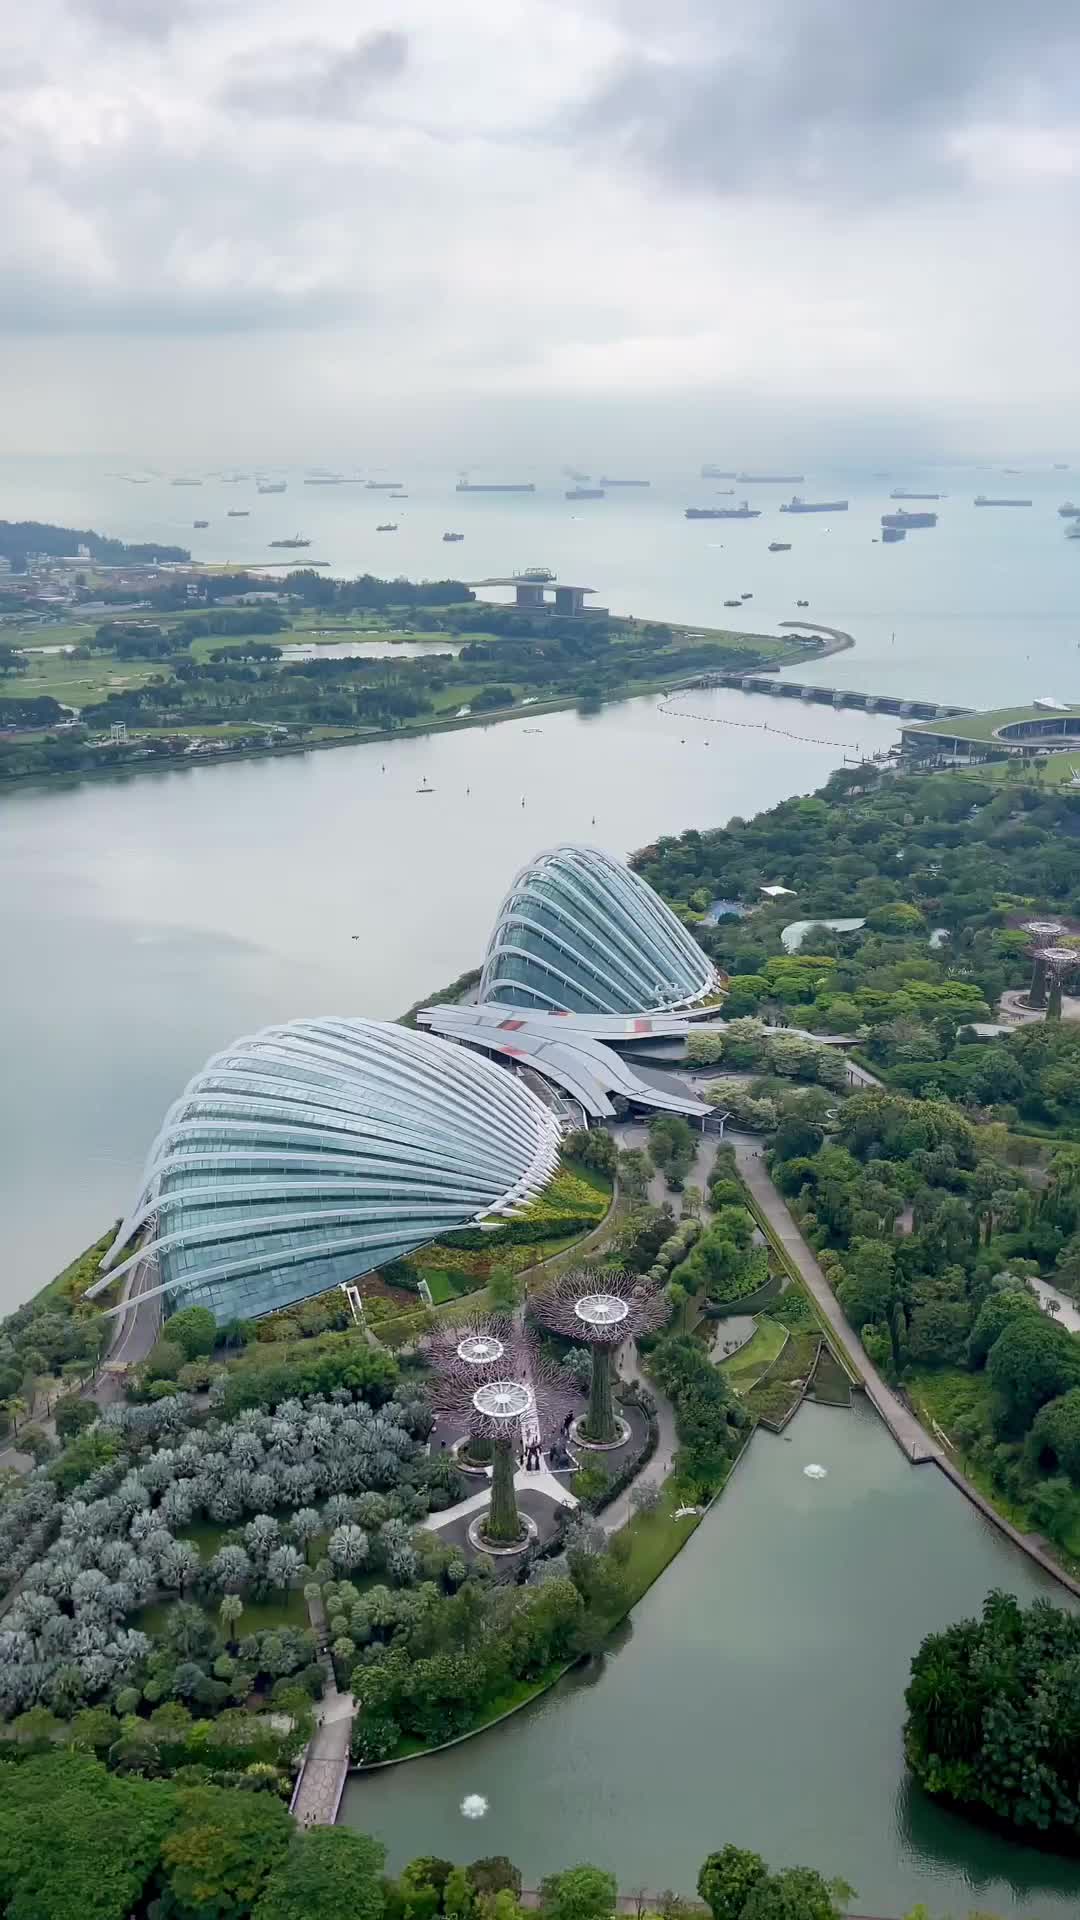 Iconic Gardens by the Bay View from Marina Bay Sands